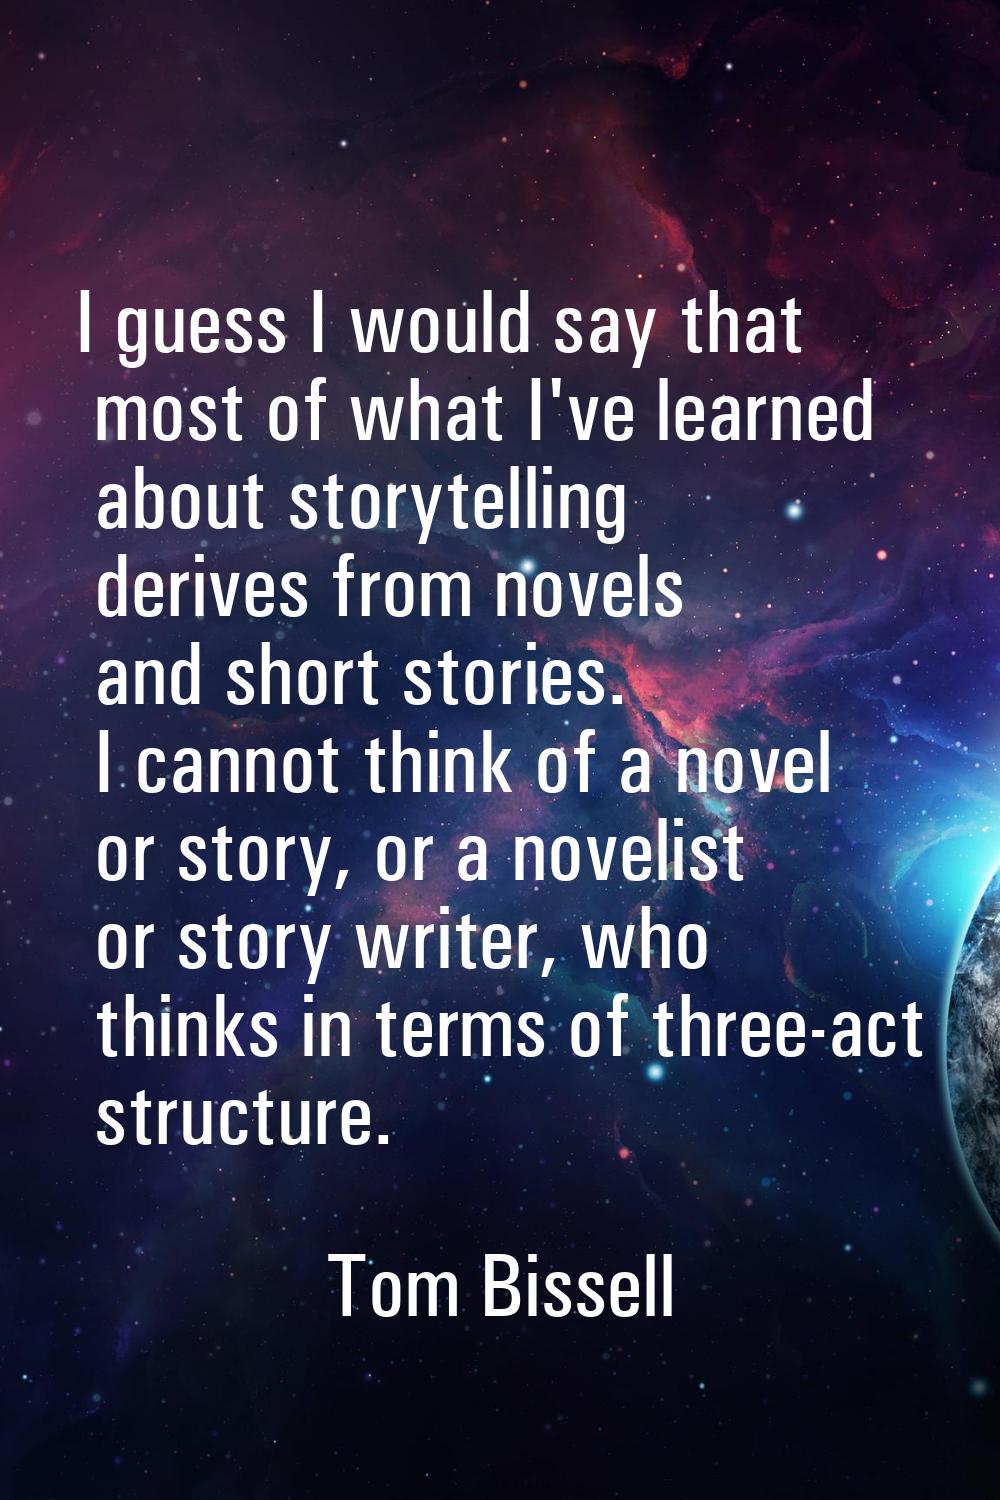 I guess I would say that most of what I've learned about storytelling derives from novels and short